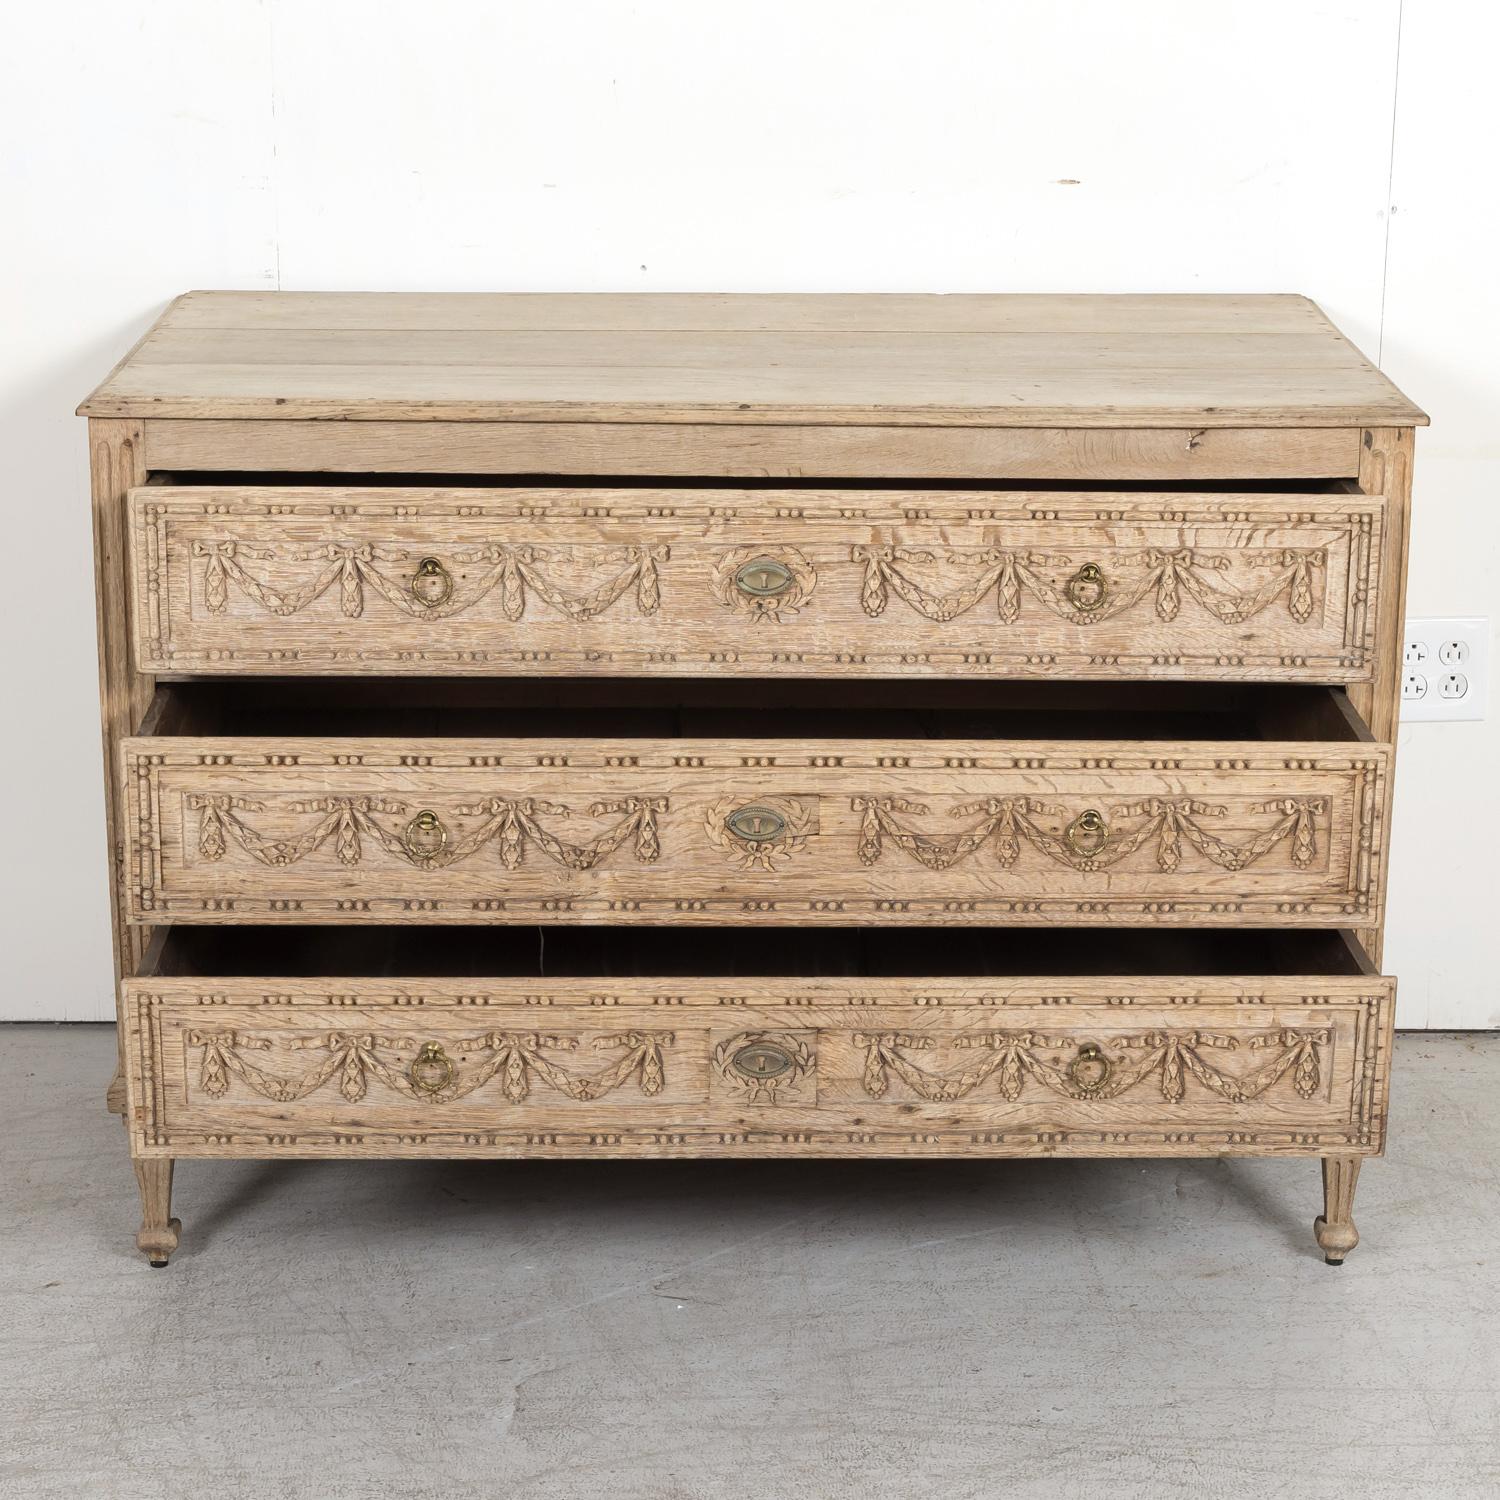 Early 19th Century French Louis XVI Style Bleached Oak Provençal Commode 5